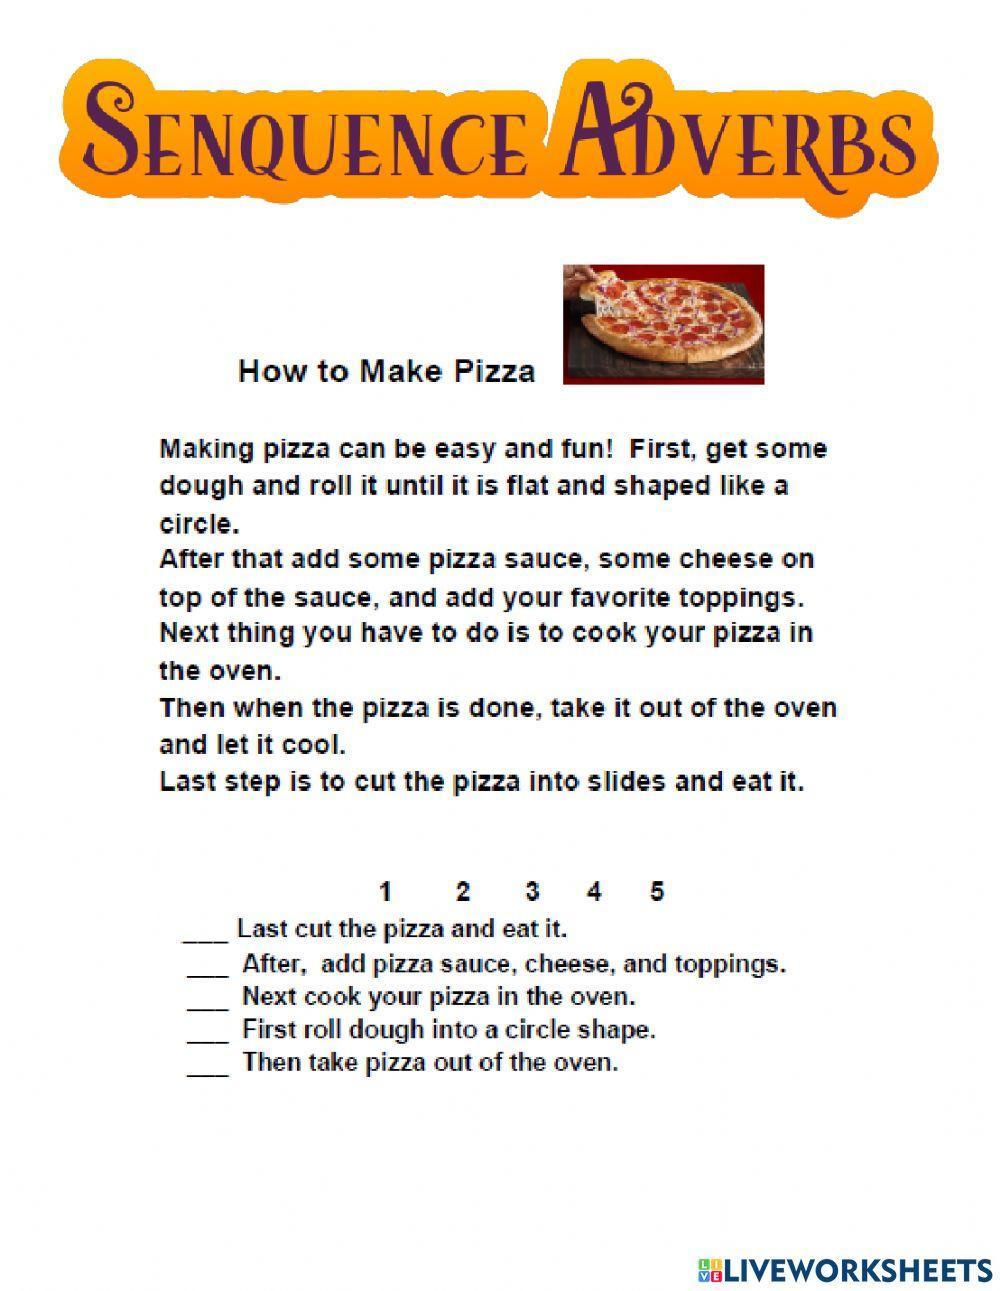 Sequence Adverbs